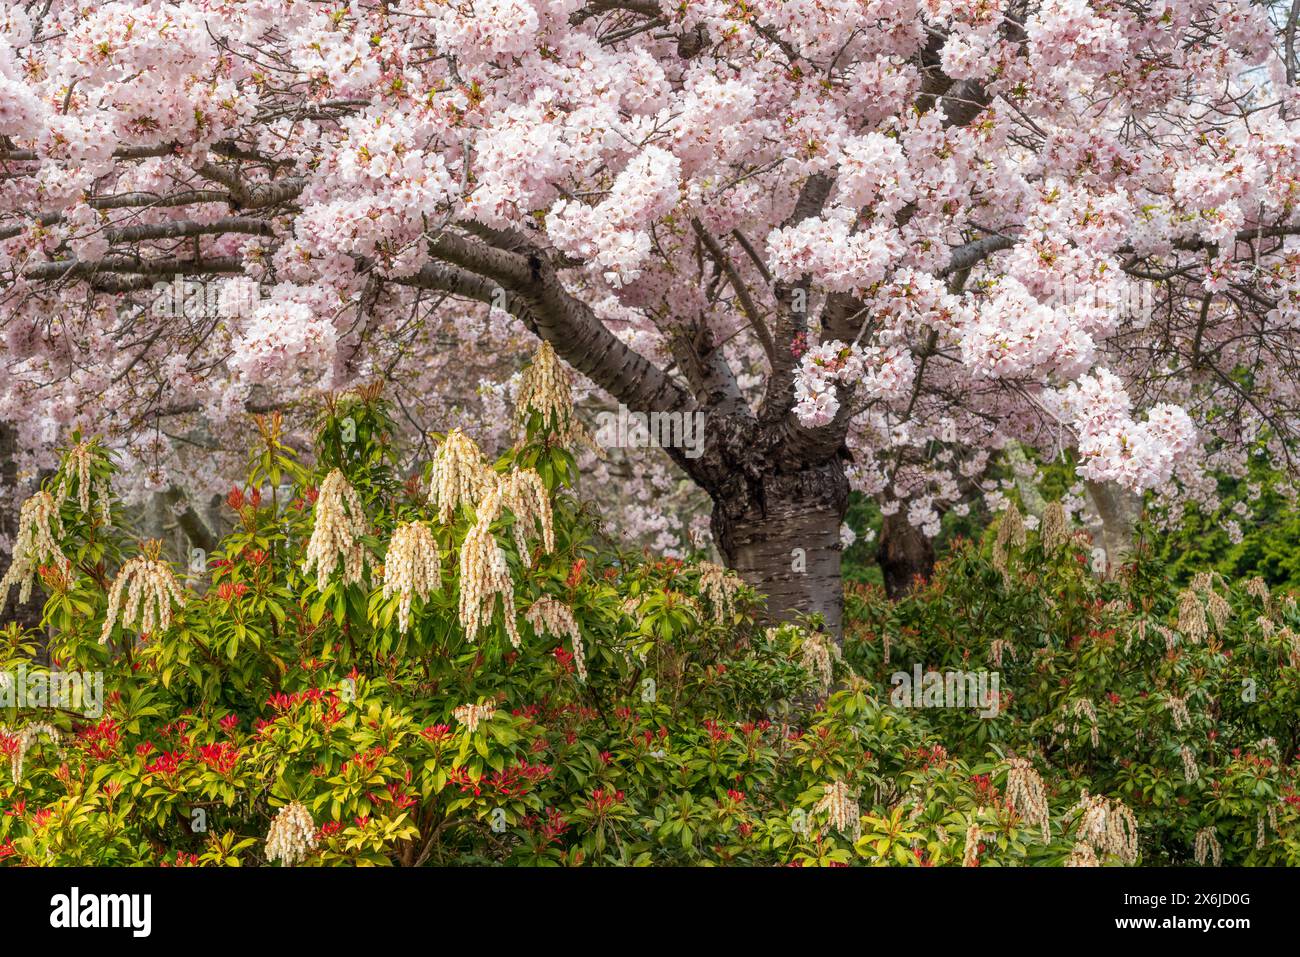 Cherry tree blossoms and Japanese pieris flowers in the Finnerty Gardens, Victoria, Vancouver Island, British Columbia, Canada. Stock Photo